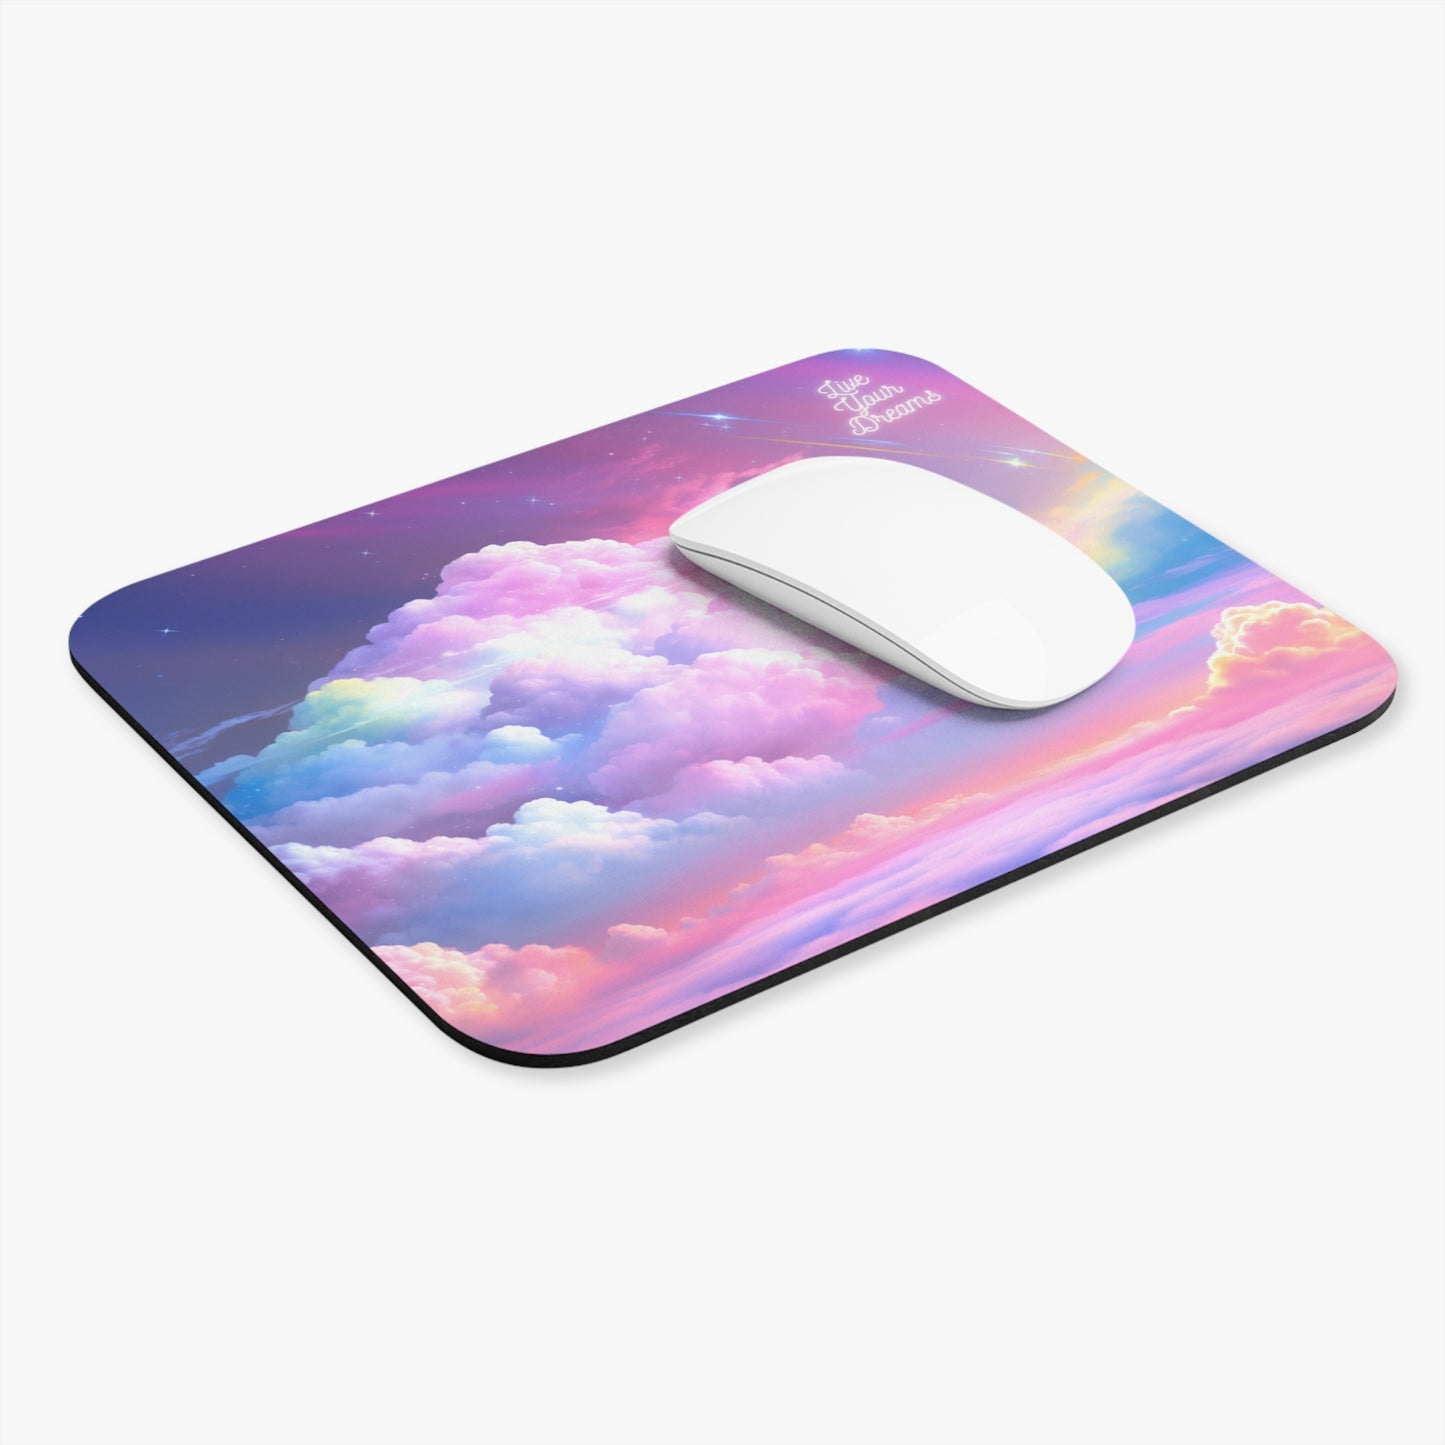 Rainbow Dreams Mouse Pad From Big Fairy Tales By Schatar